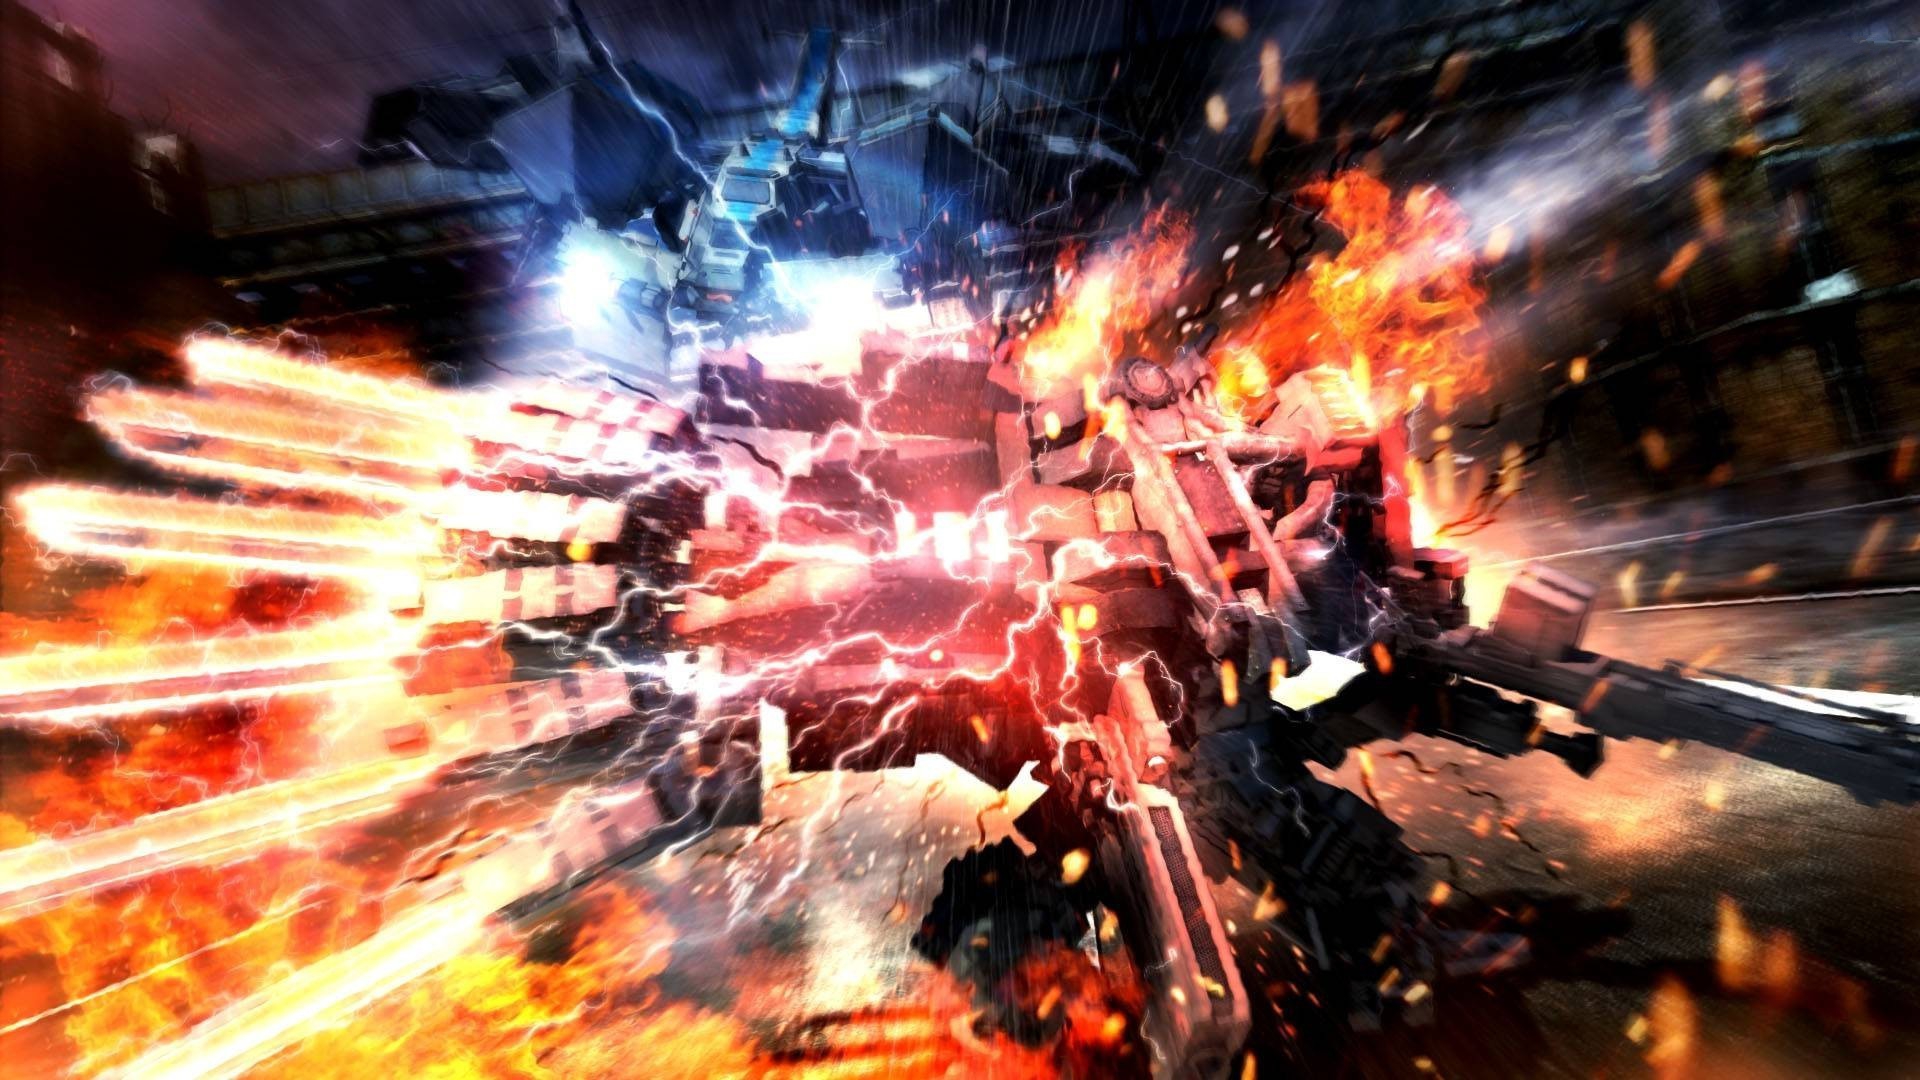 download armored core 1 pc